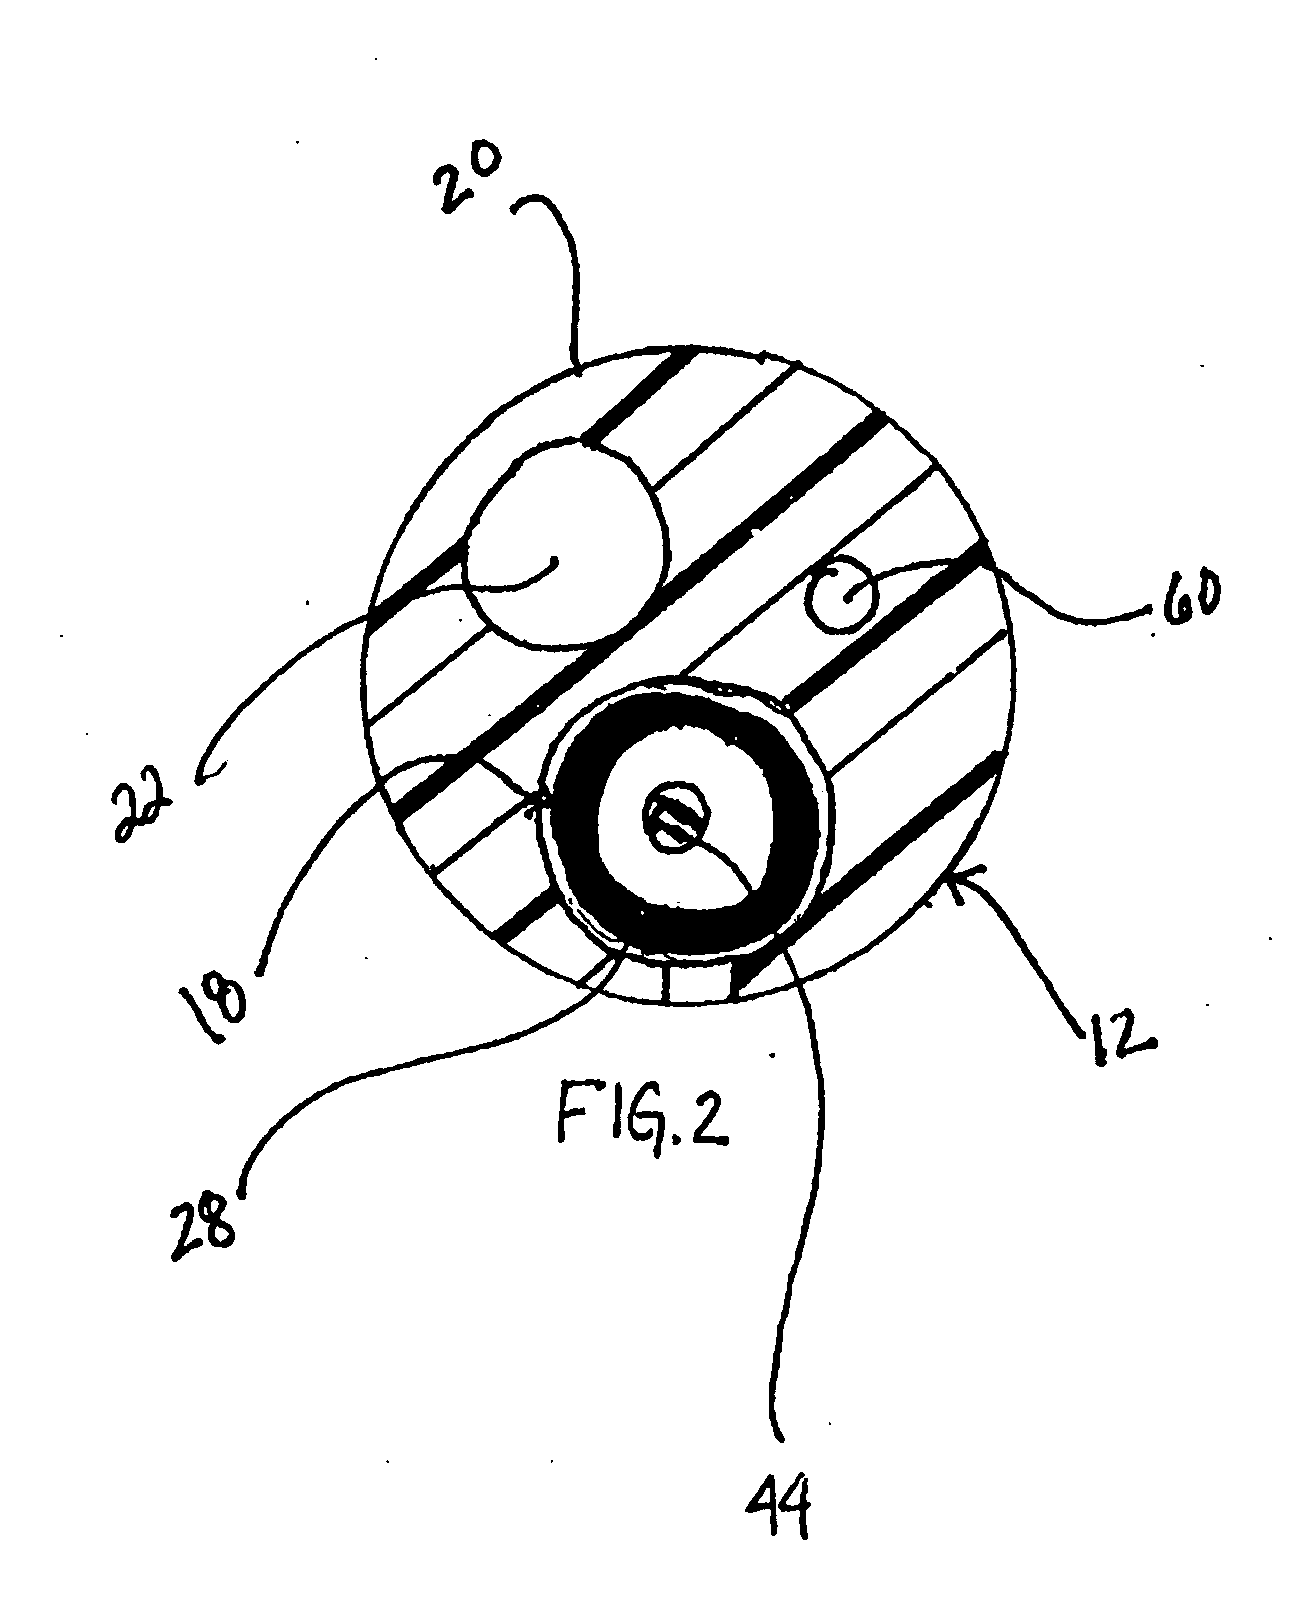 Infusion catheter system with telescoping cannula